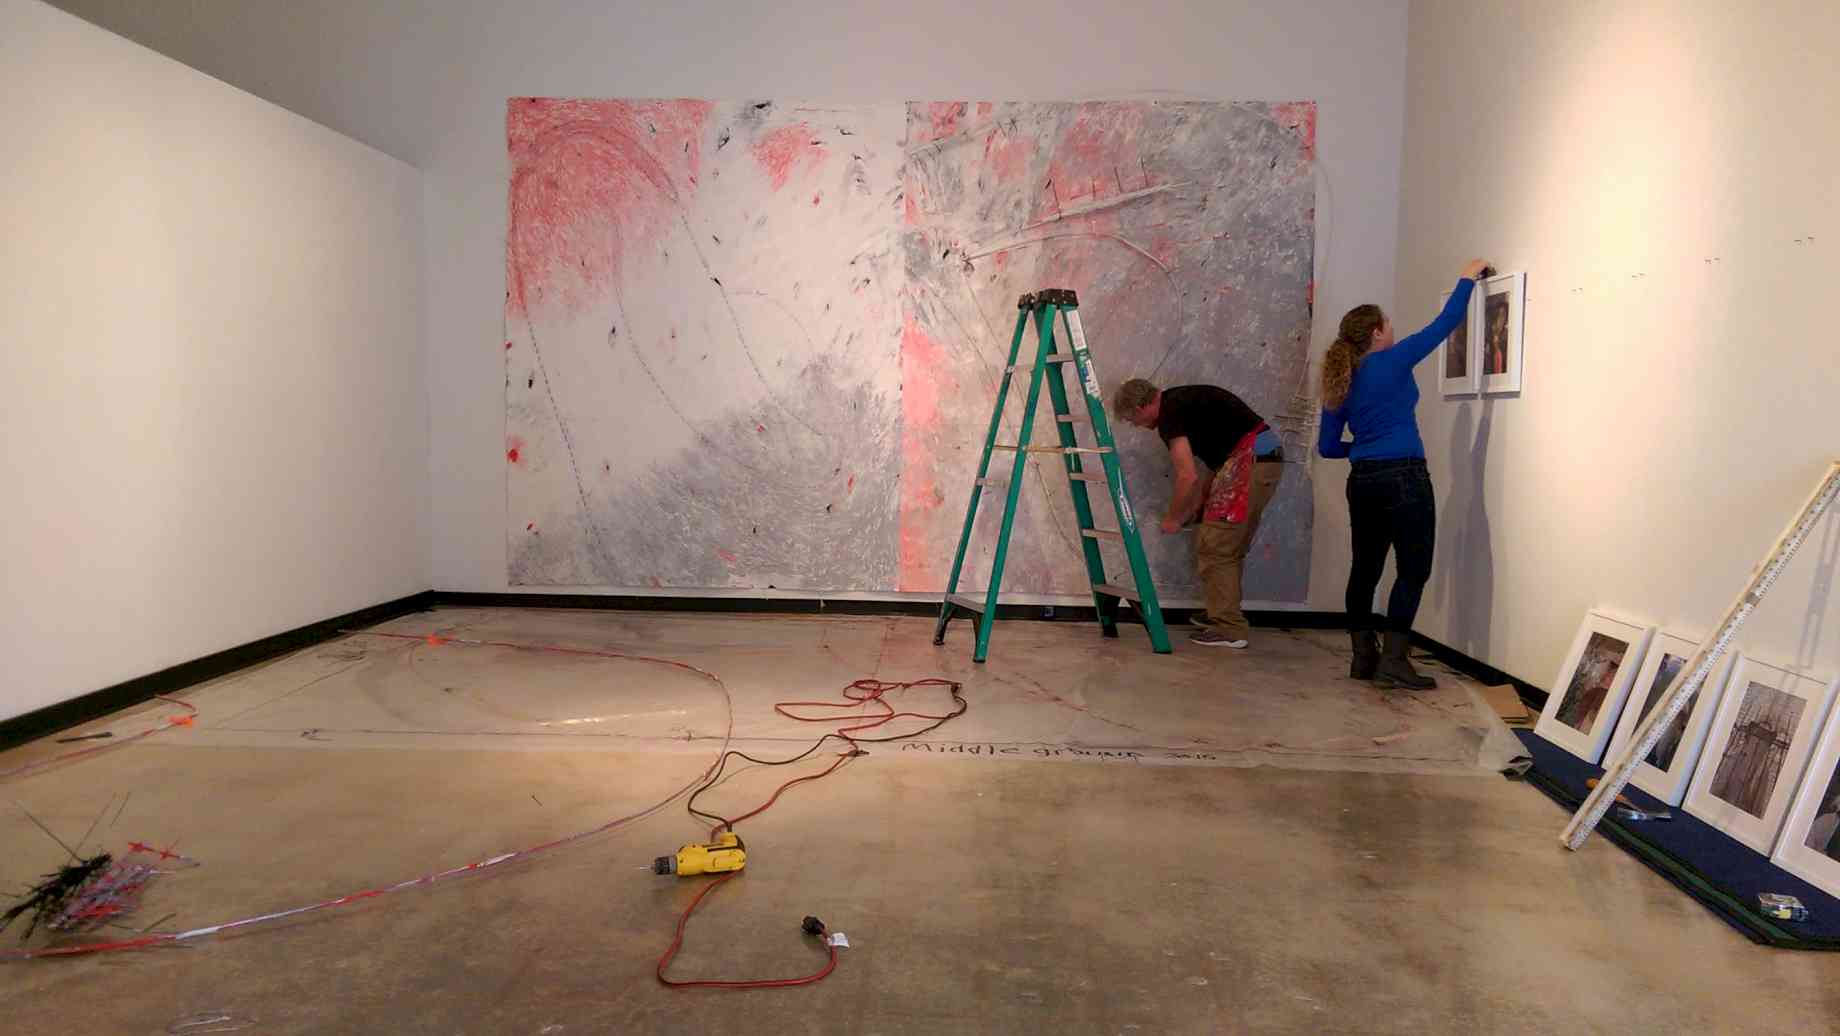 Alumni Kaitlin Hof-Mahoney installs an exhibit at the University Gallery. [Alt text: A gallery mid-installation. A woman measures two pieces of art on a wall, and a man works on a wall-sized mural.]